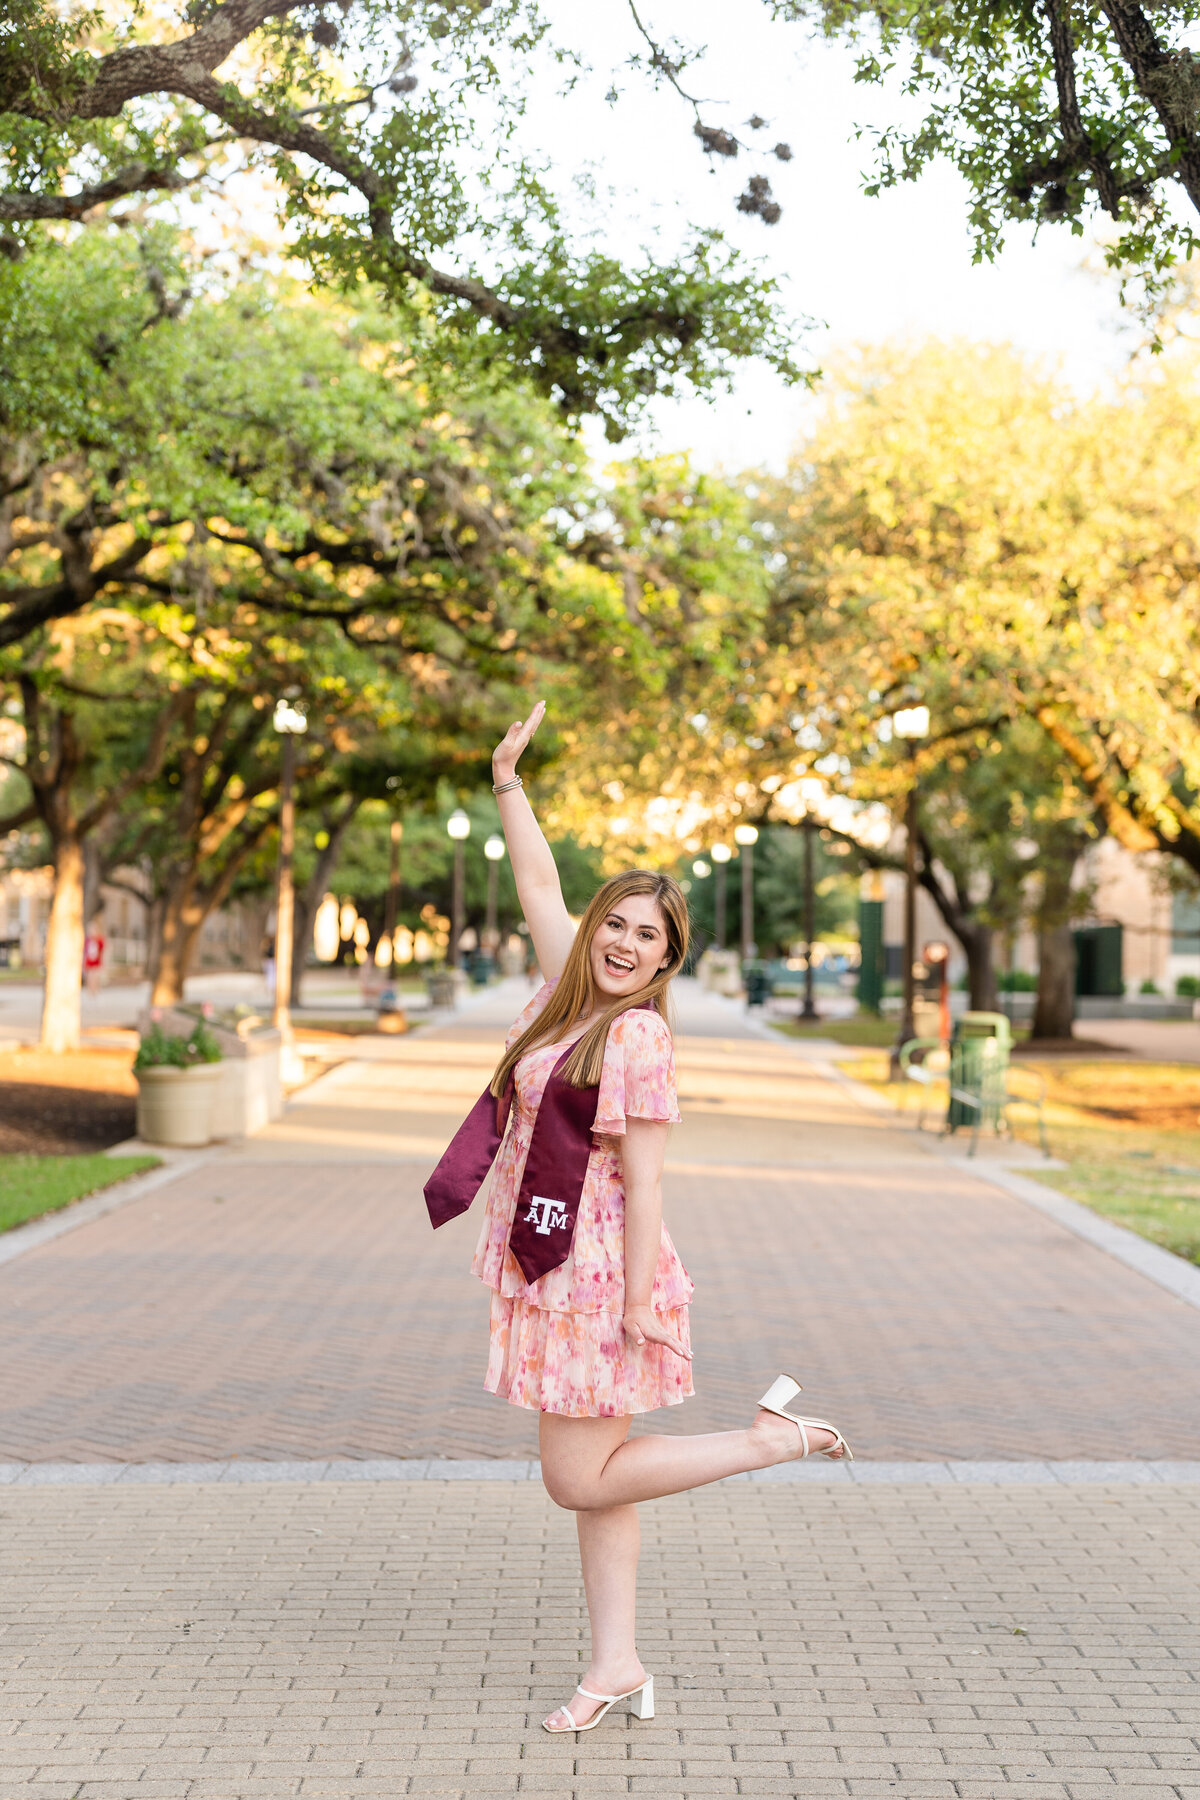 Texas A&M senior girl celebrating with hands in the air while wearing Aggie stole and multi colored dress in the trees of Military Plaza